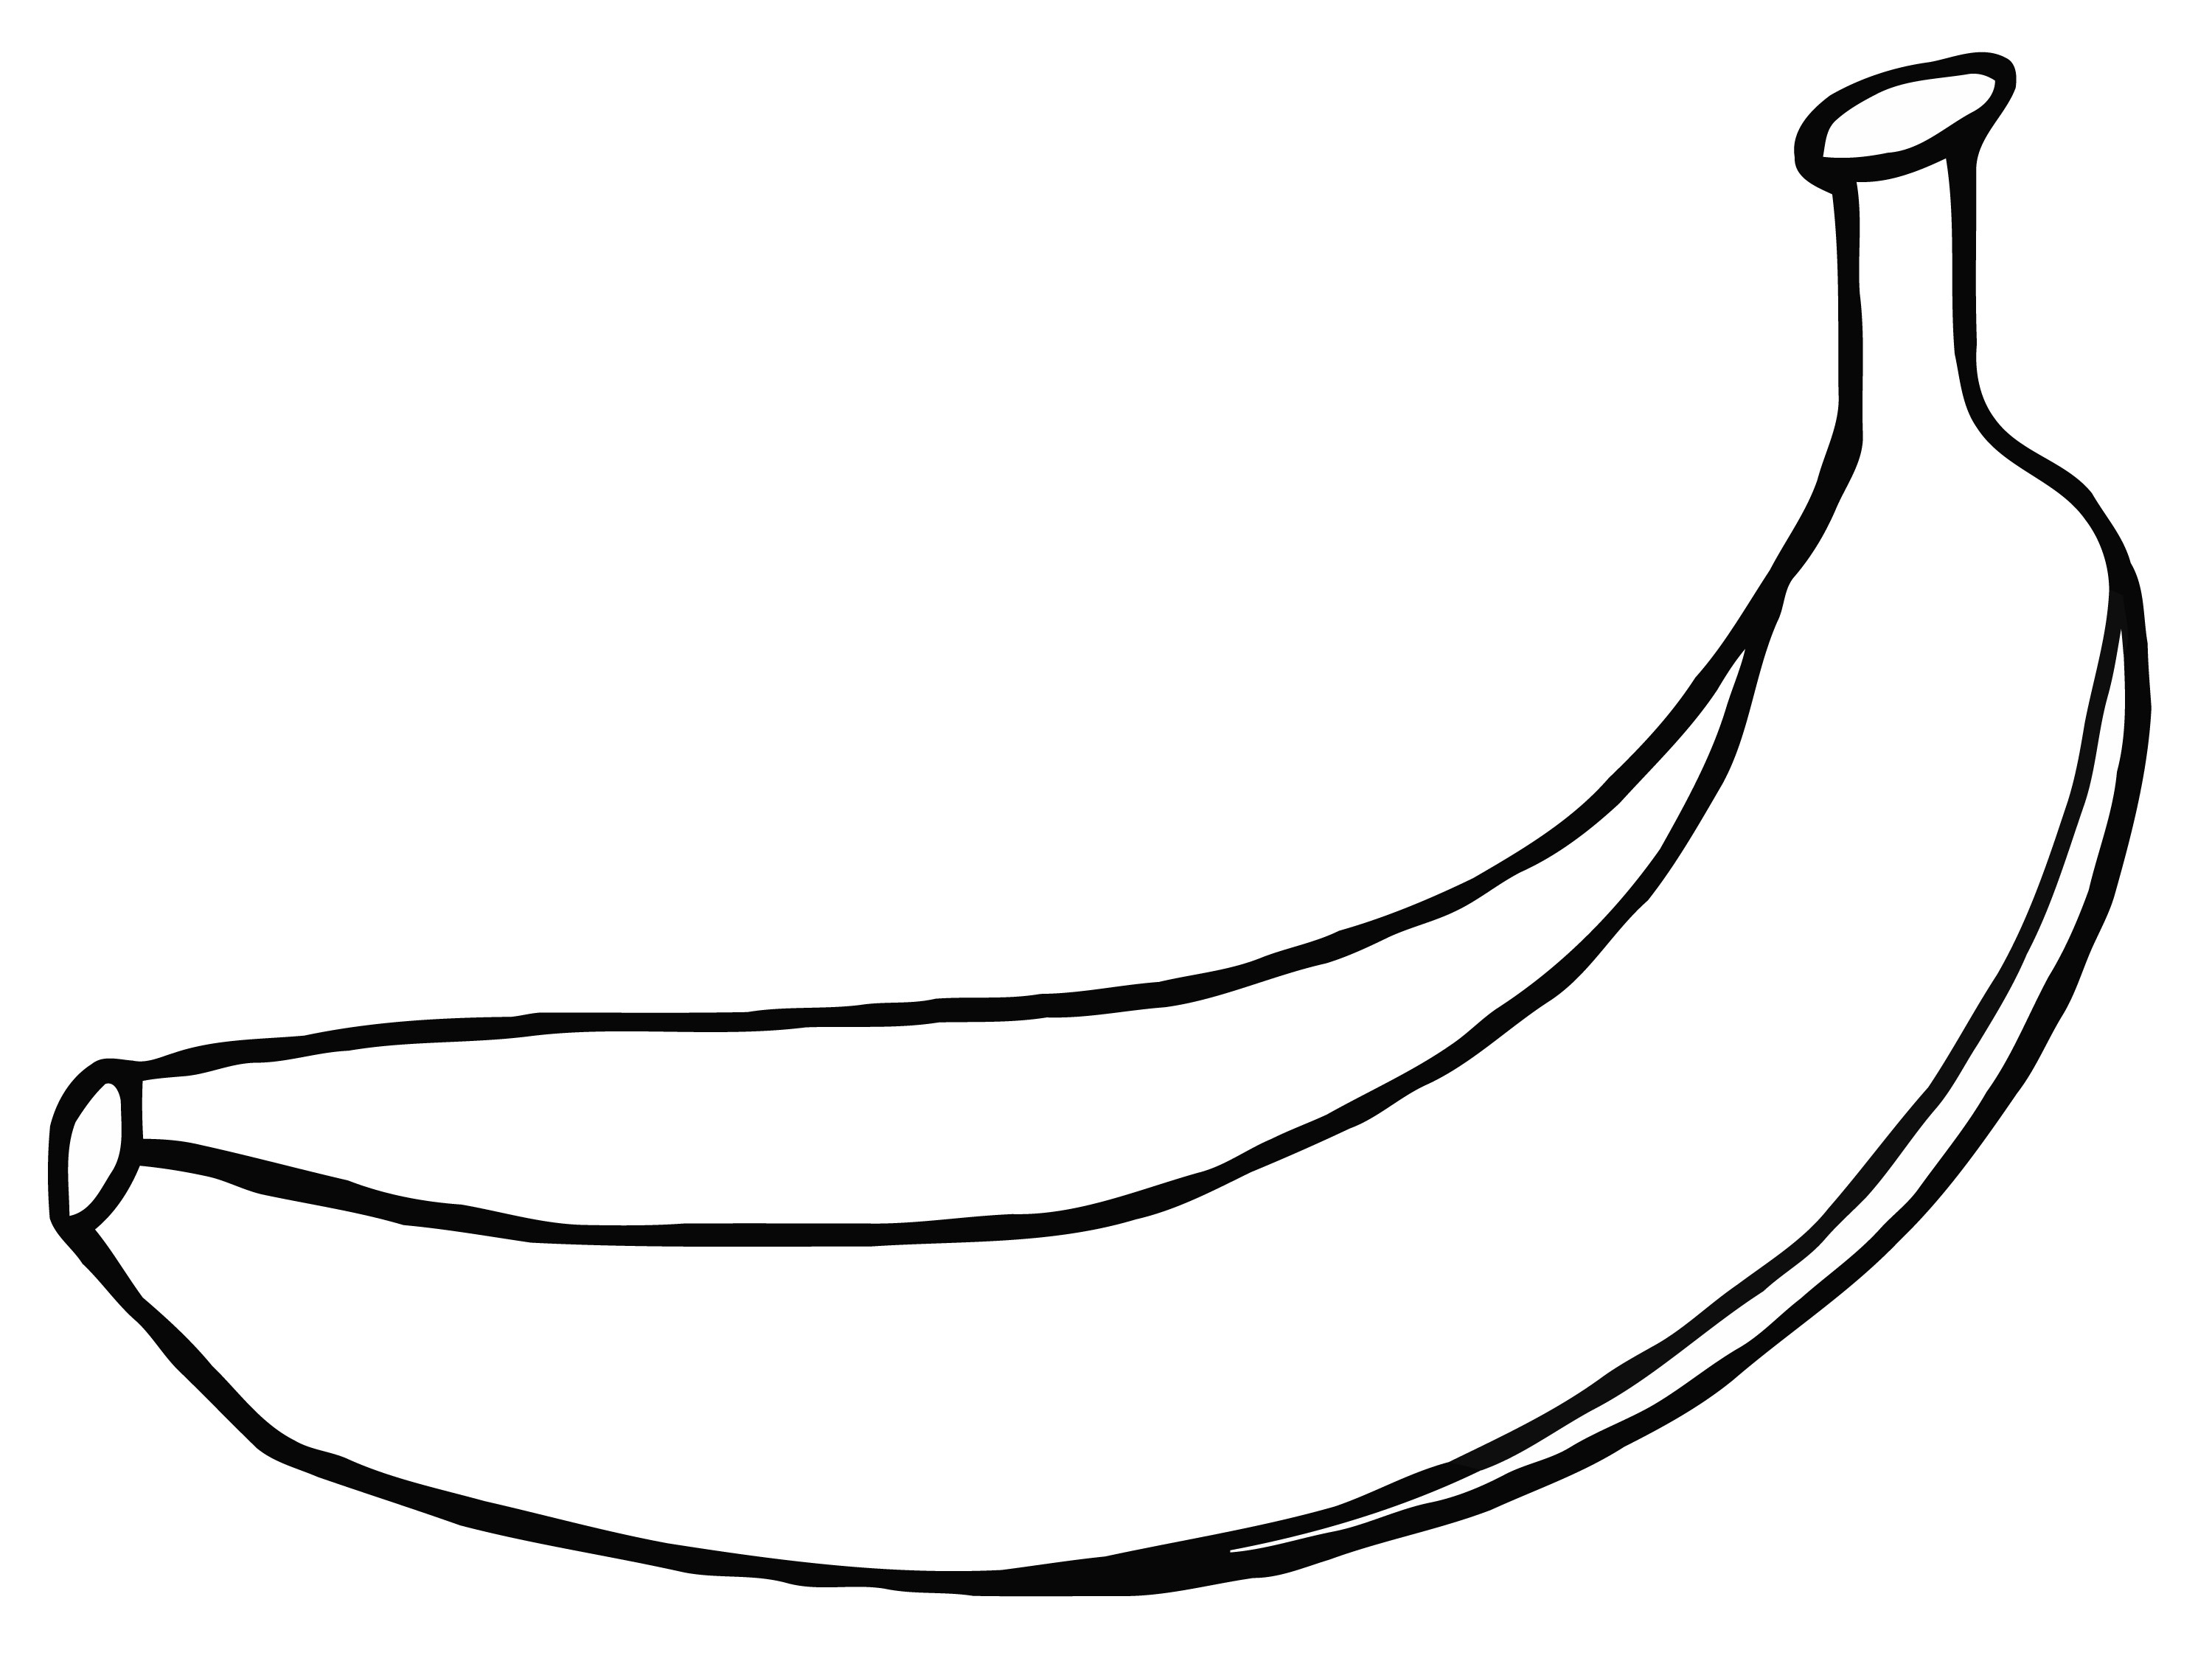 banana picture to color bananas coloring pages learn to coloring to picture color banana 